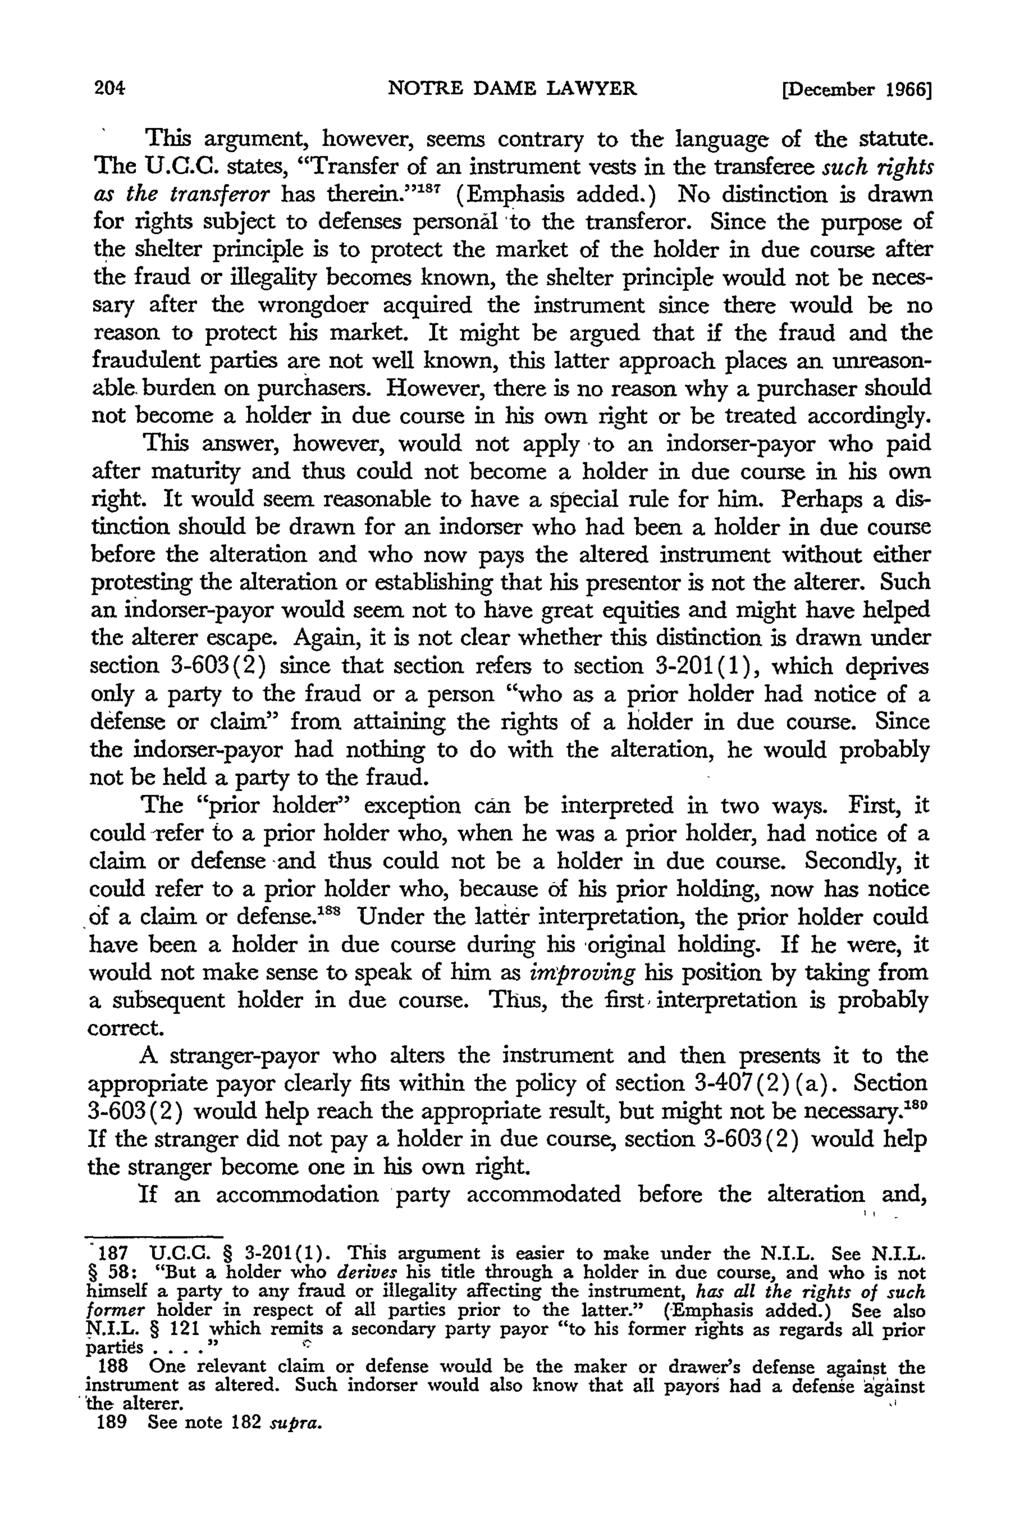 NOTRE DAME LAWYER [December 1966] This argument, however, seems contrary to the language of the statute. The U.C.